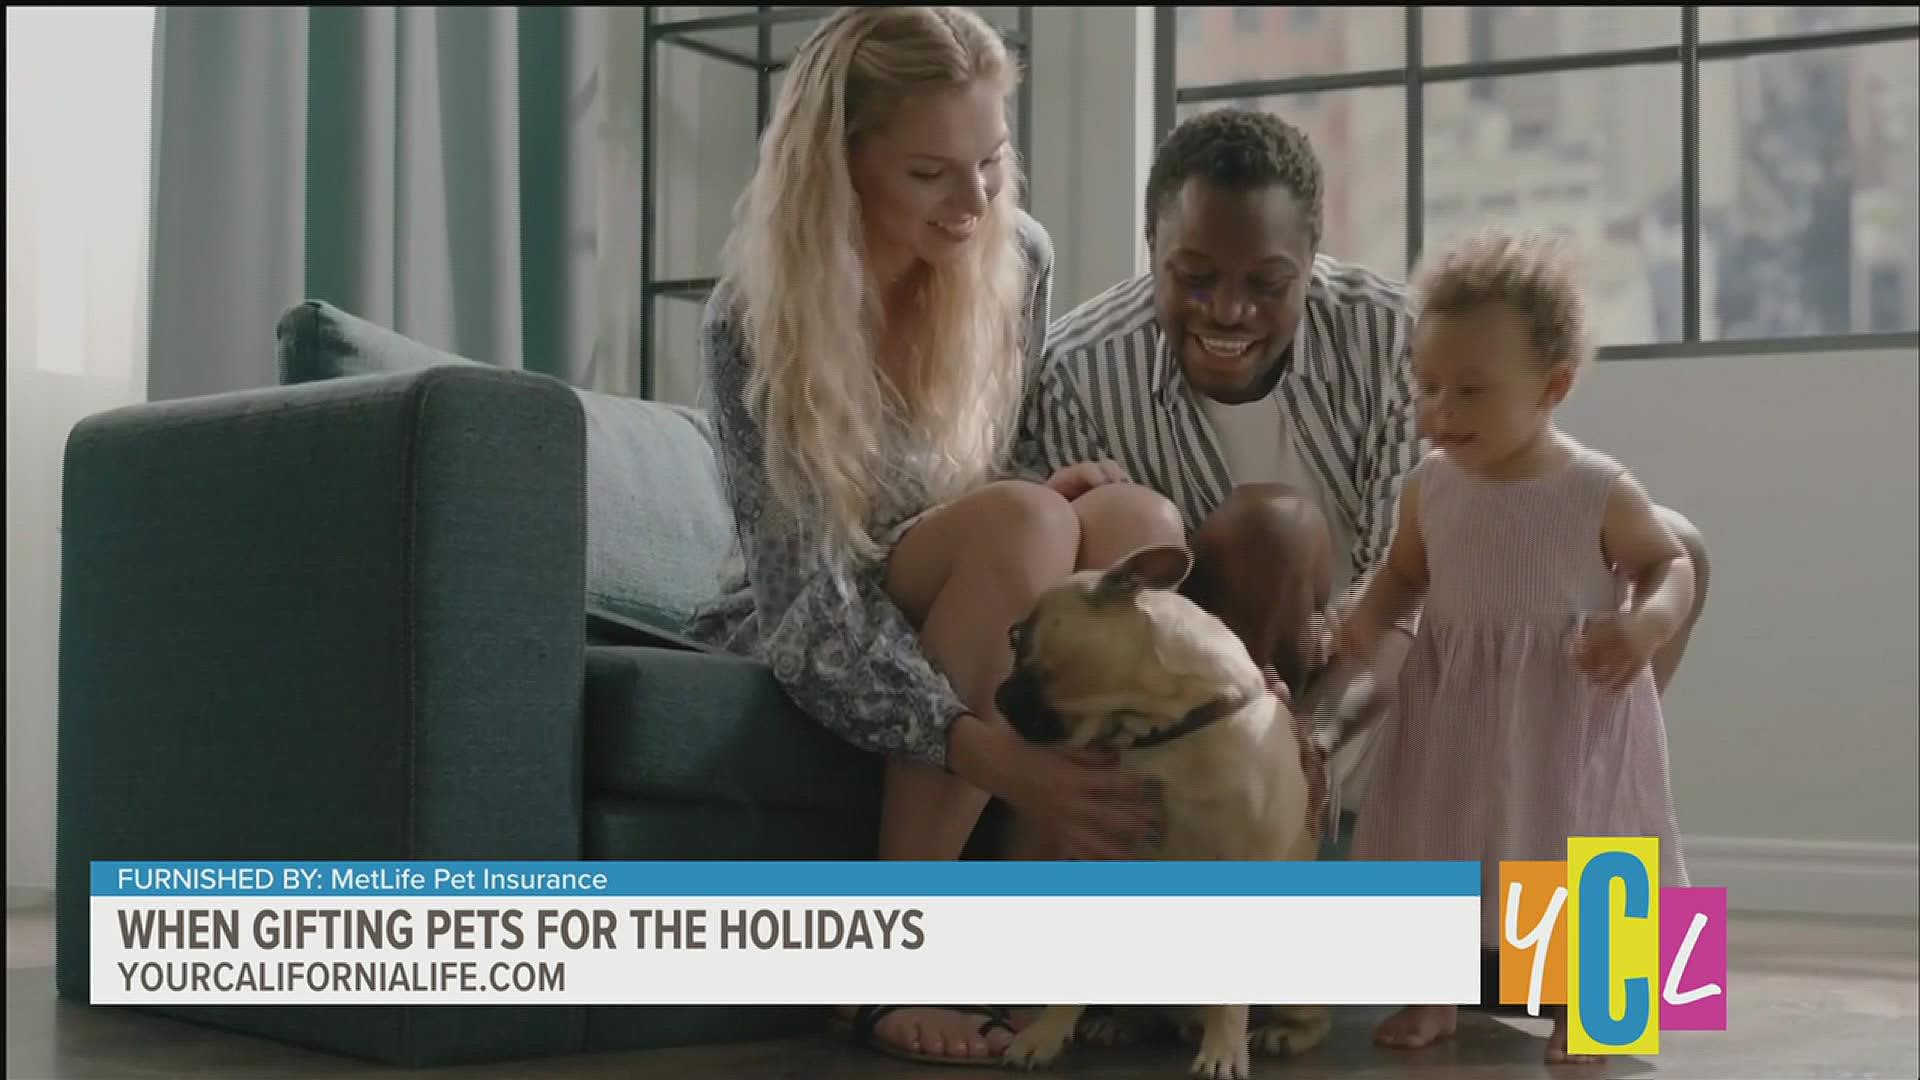 Gifting a pet for the holiday sounds like a cute idea but here’s some things to consider before adding a four-legged friend to your family.